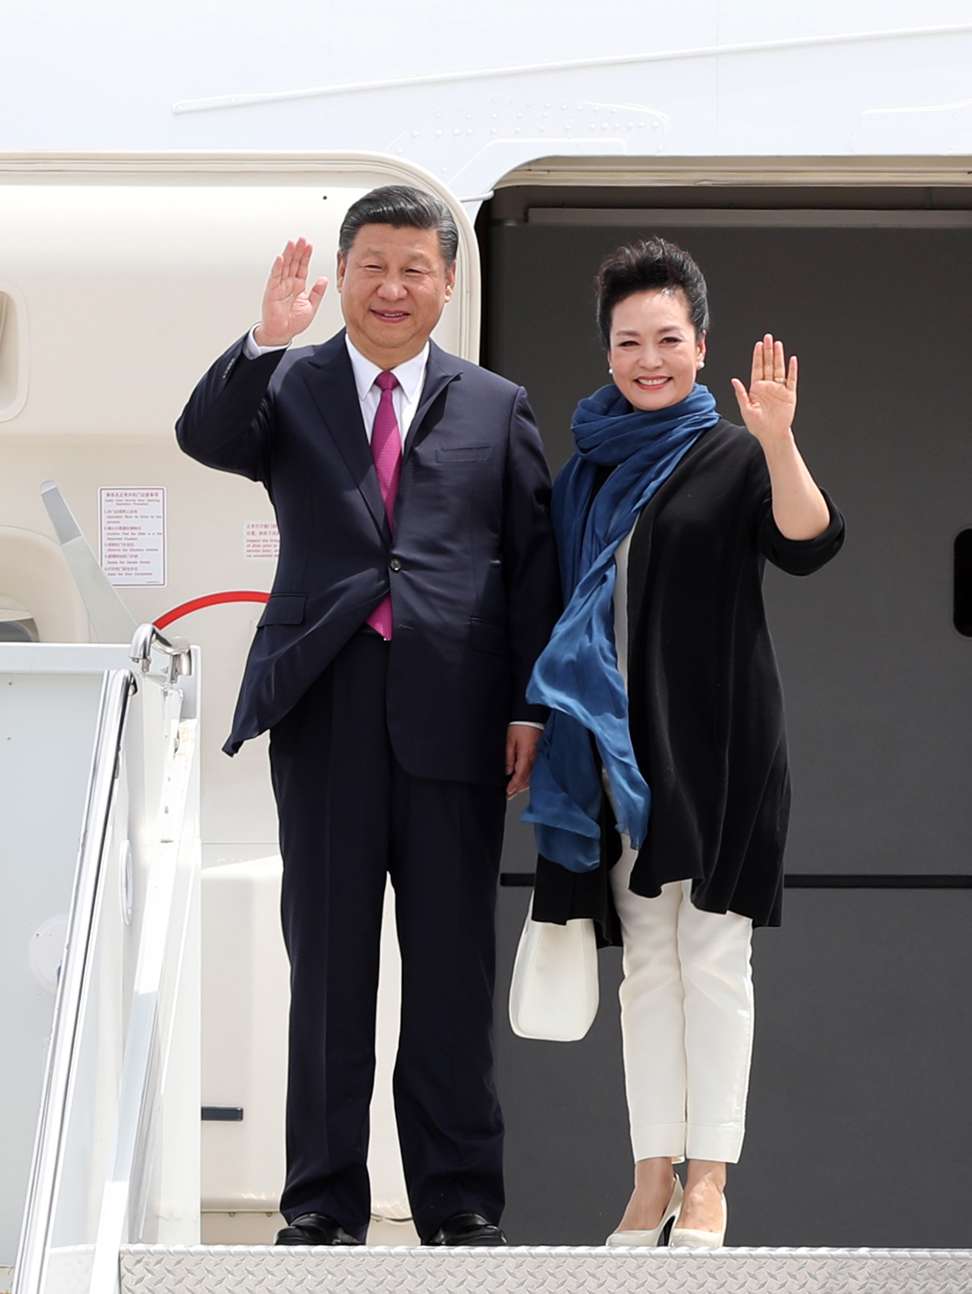 Chinese President Xi Jinping and his wife Peng Liyuan arrive at Palm Beach International Airport in Florida on Thursday. Photo: Xinhua